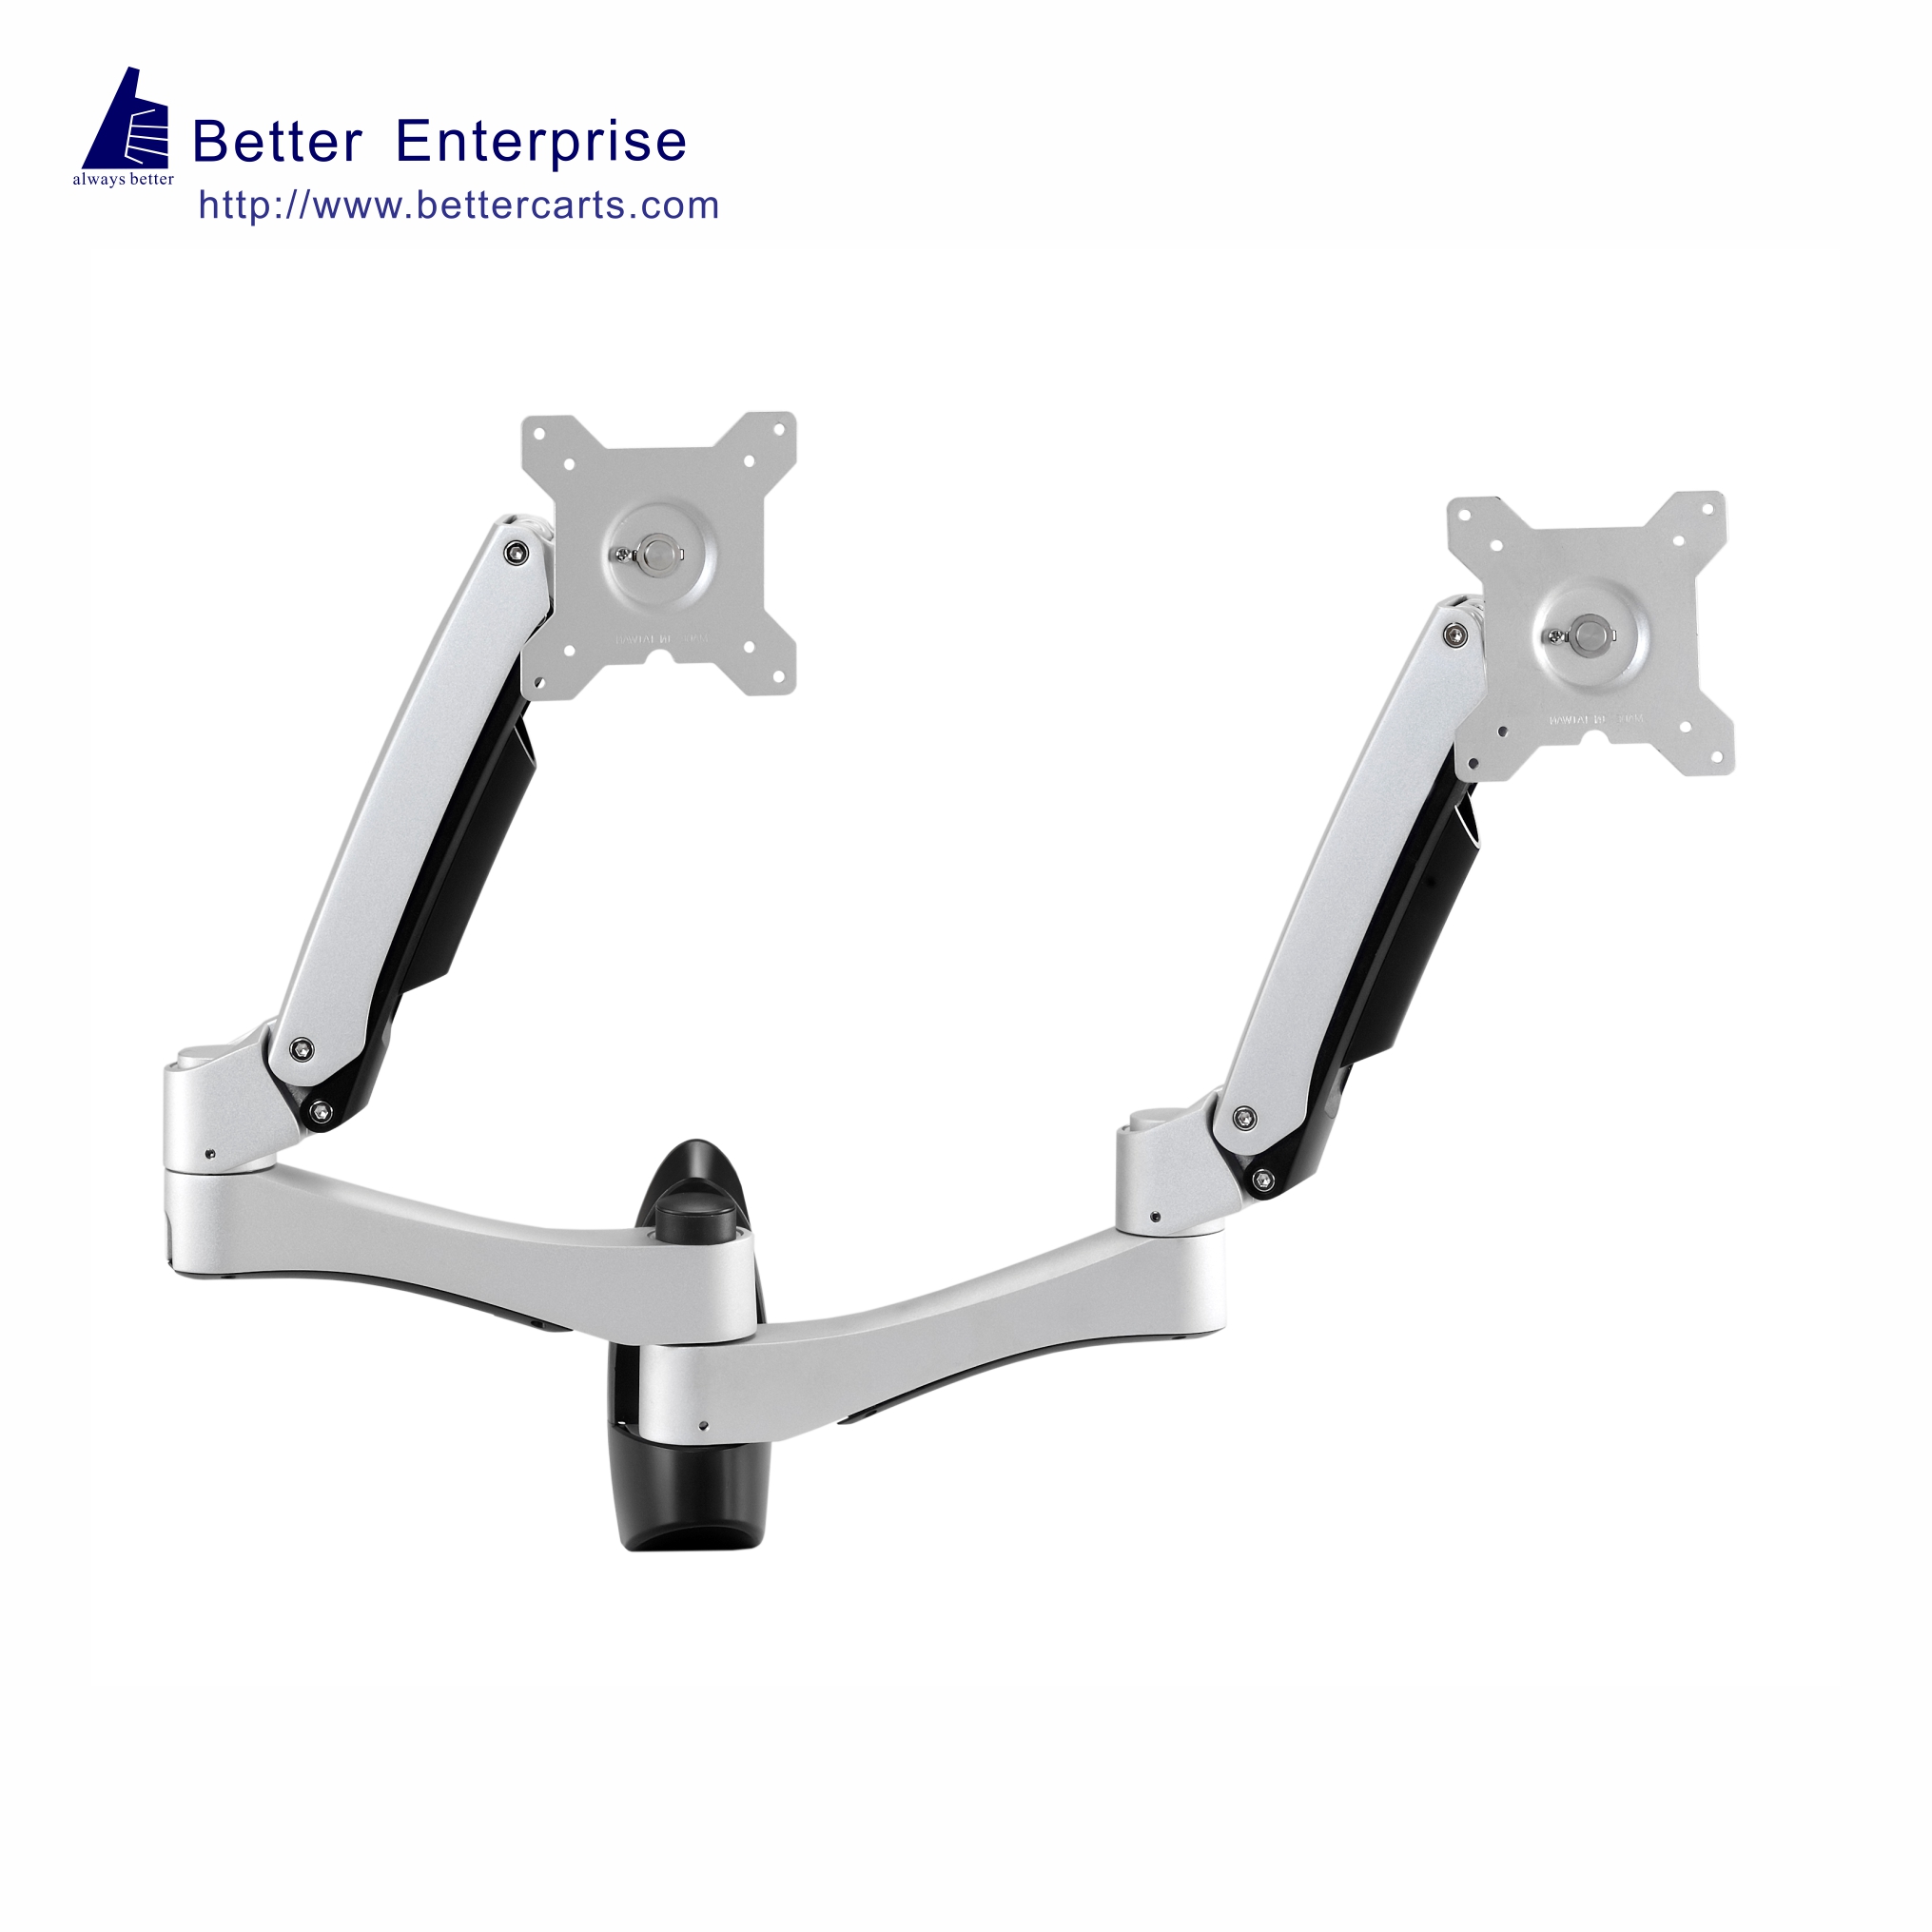 Wall Mount LCD Monitor Duo Arm